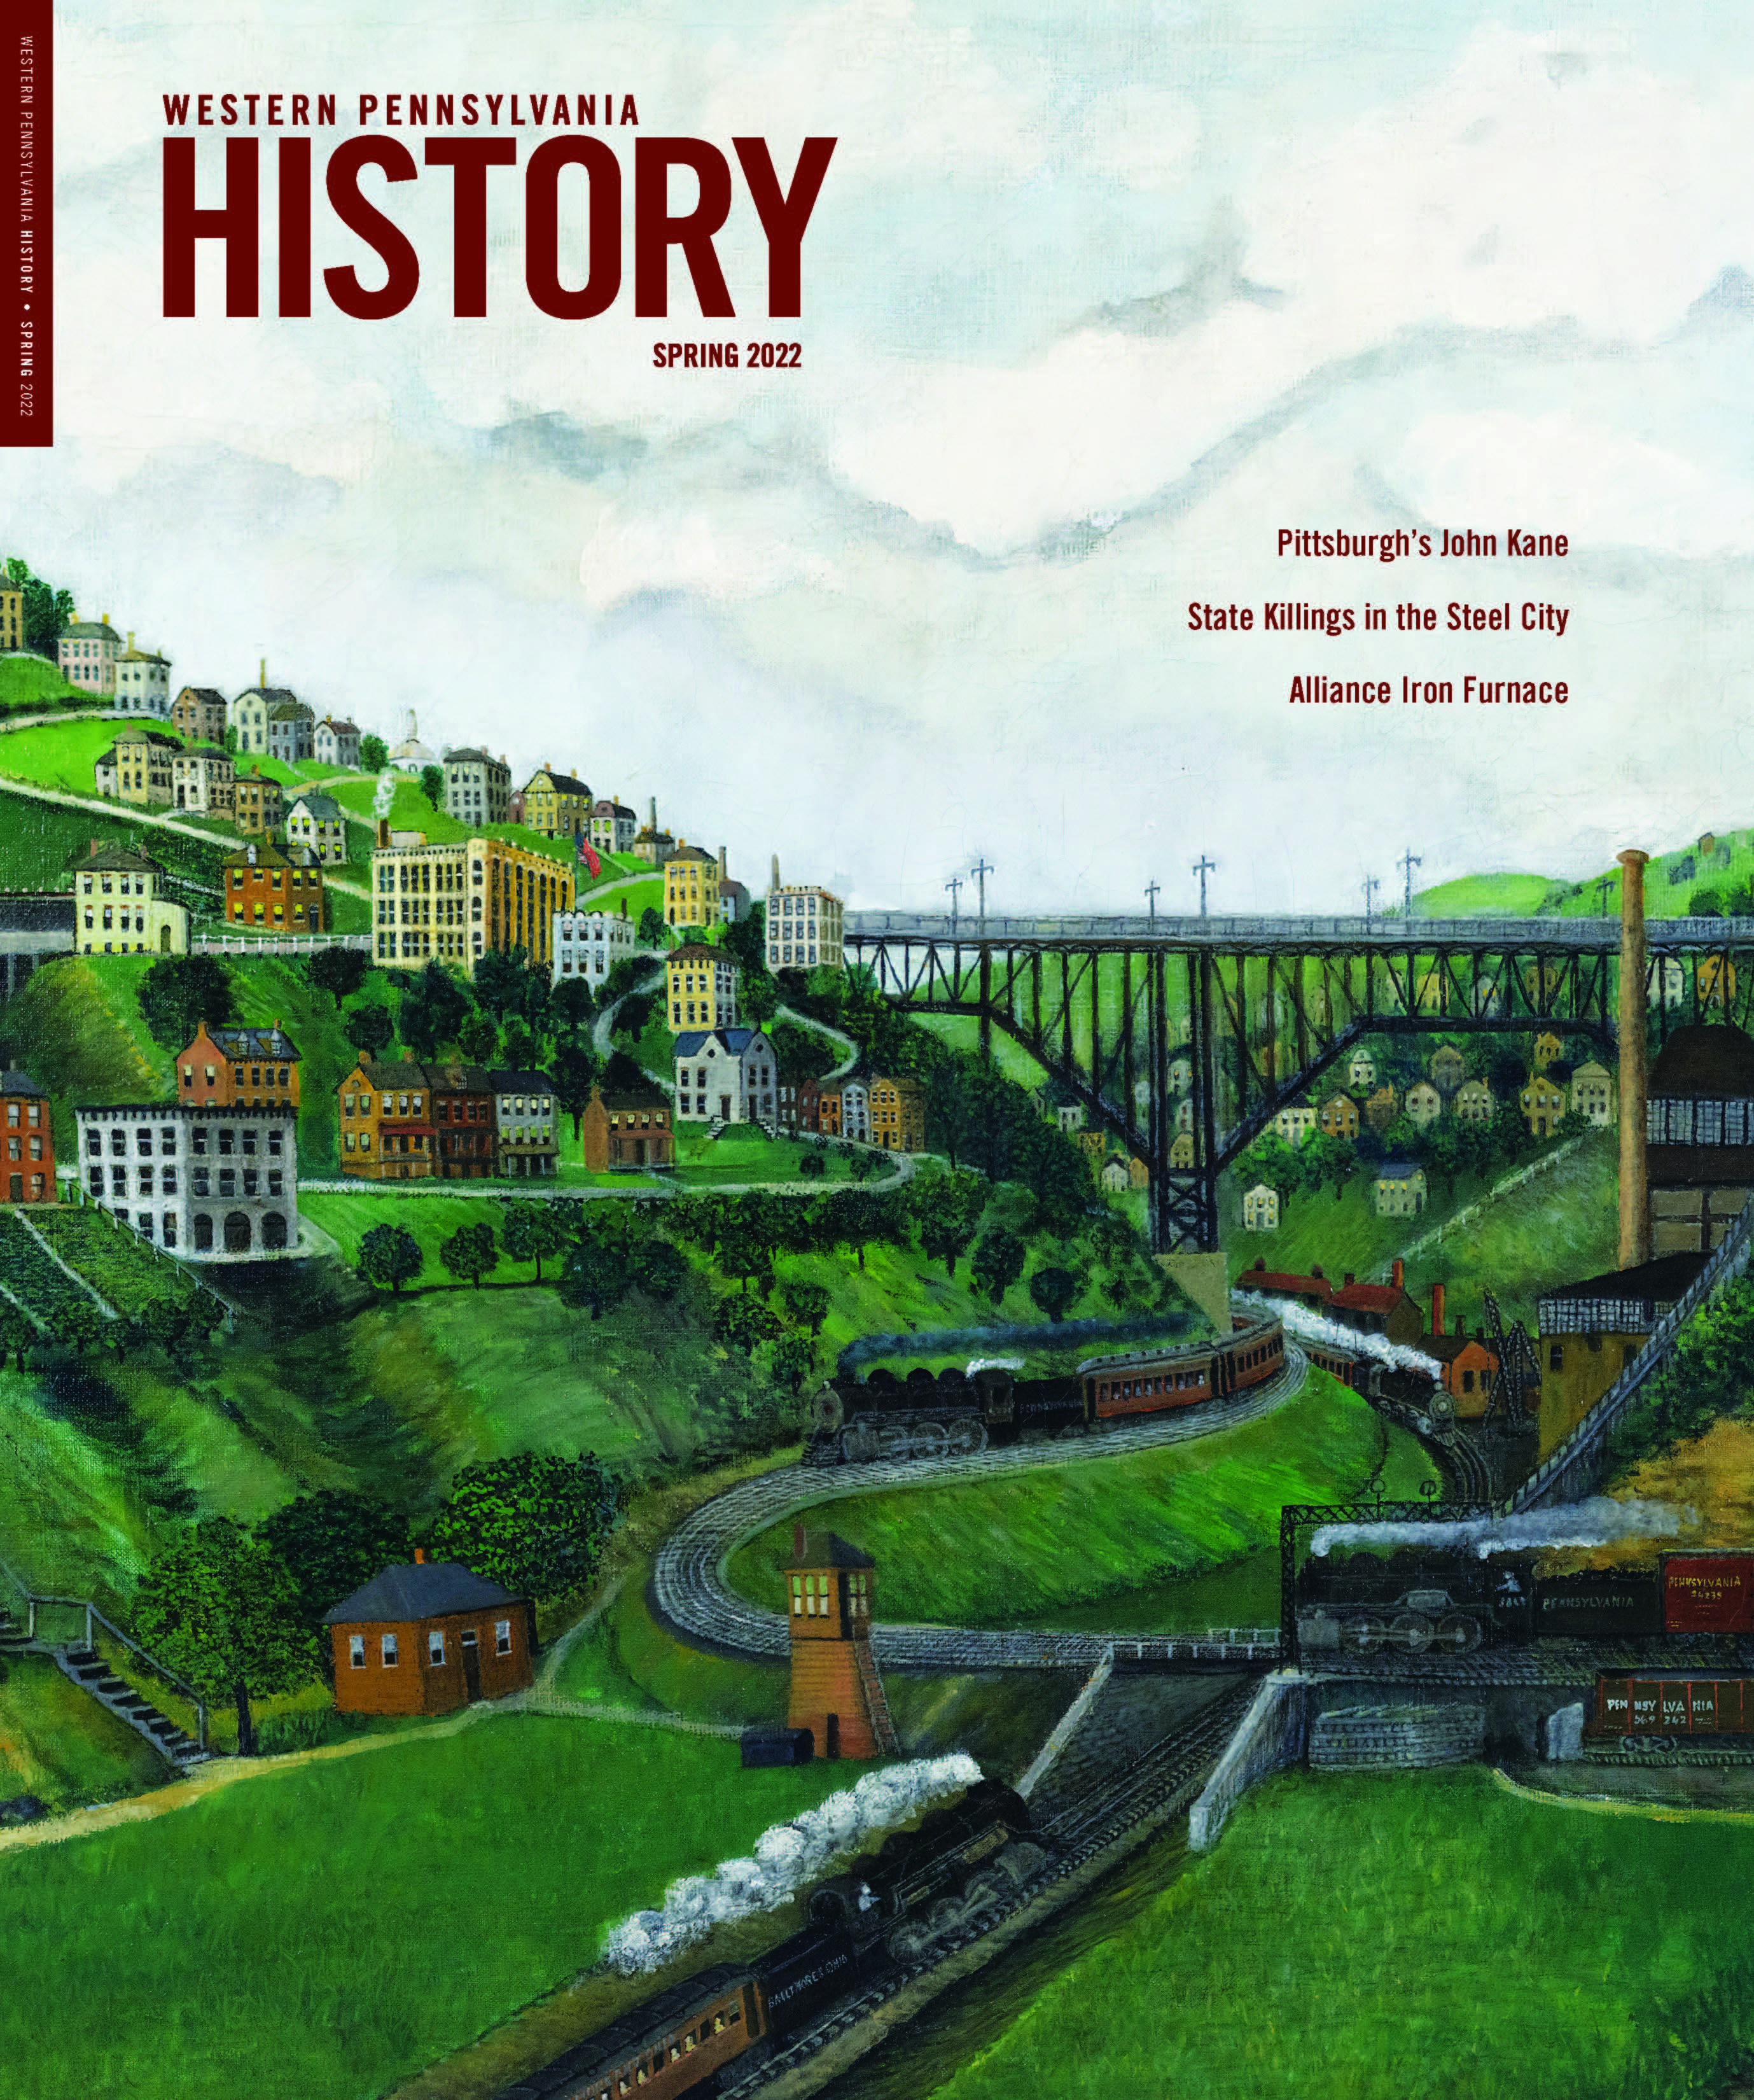 Magazine cover with artwork of multiple trains running over green hillsides and under bridges.